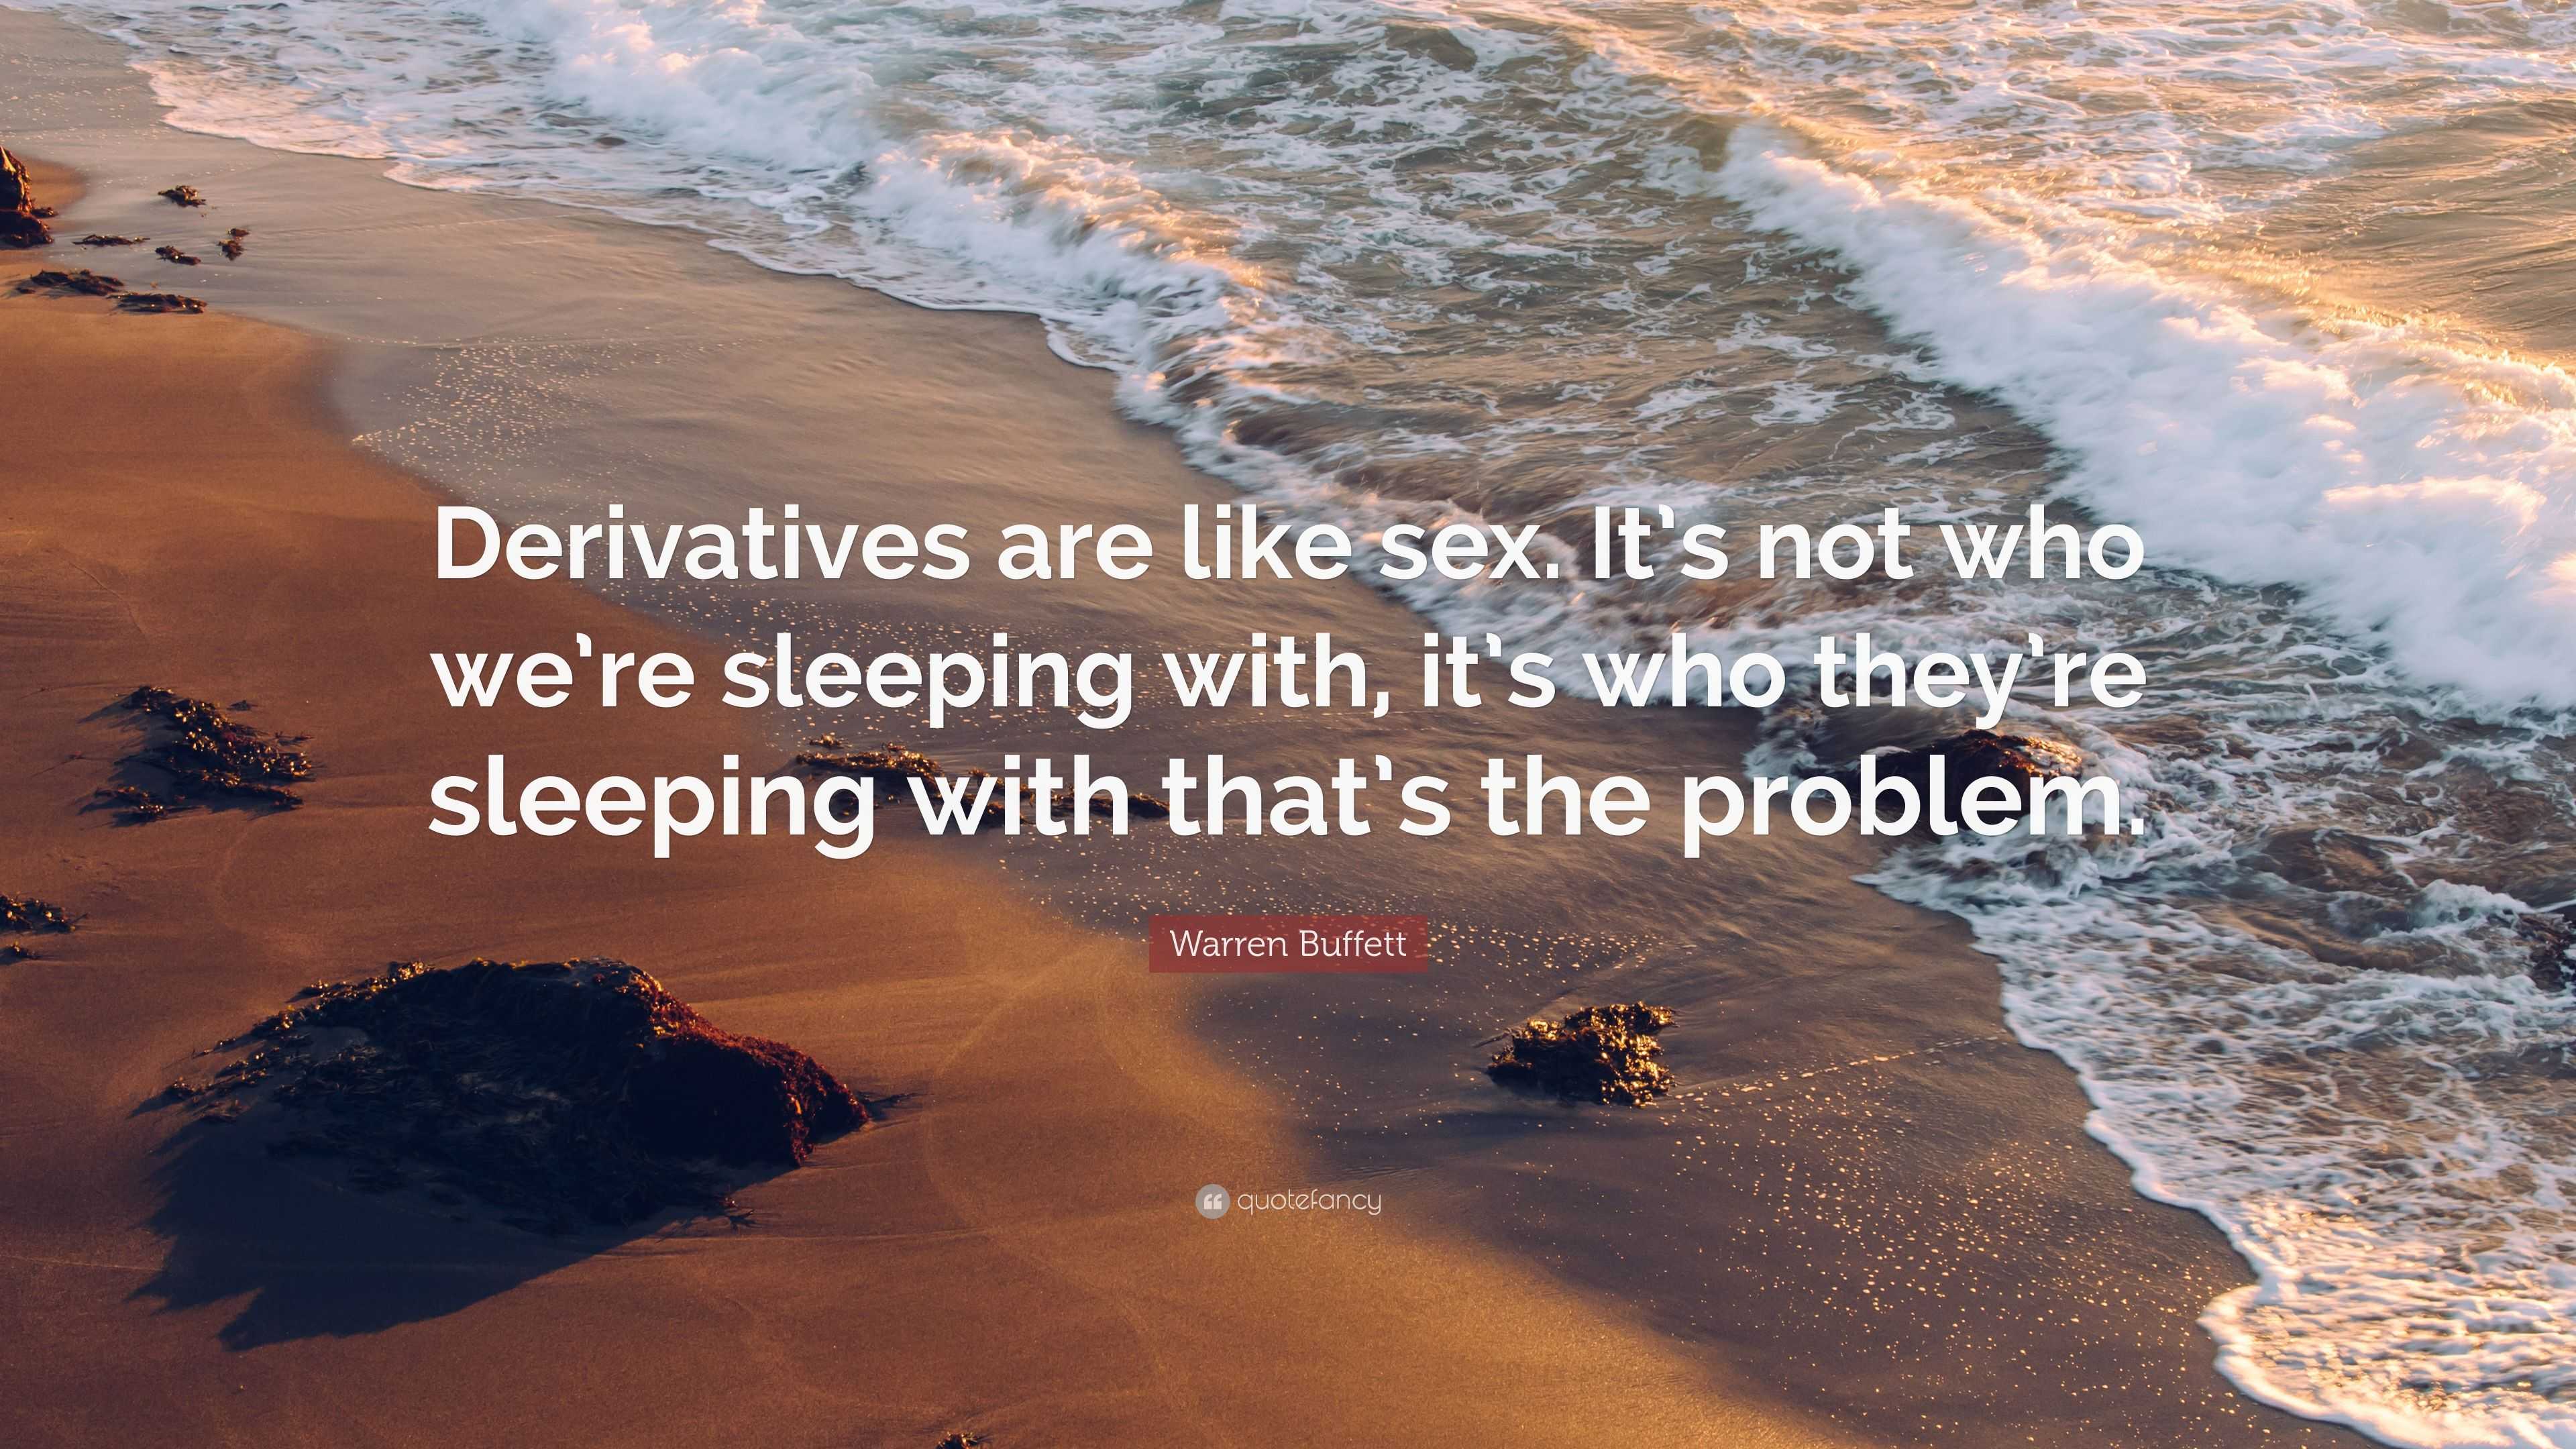 Warren Buffett Quote “derivatives Are Like Sex Its Not Who Were Sleeping With Its Who They